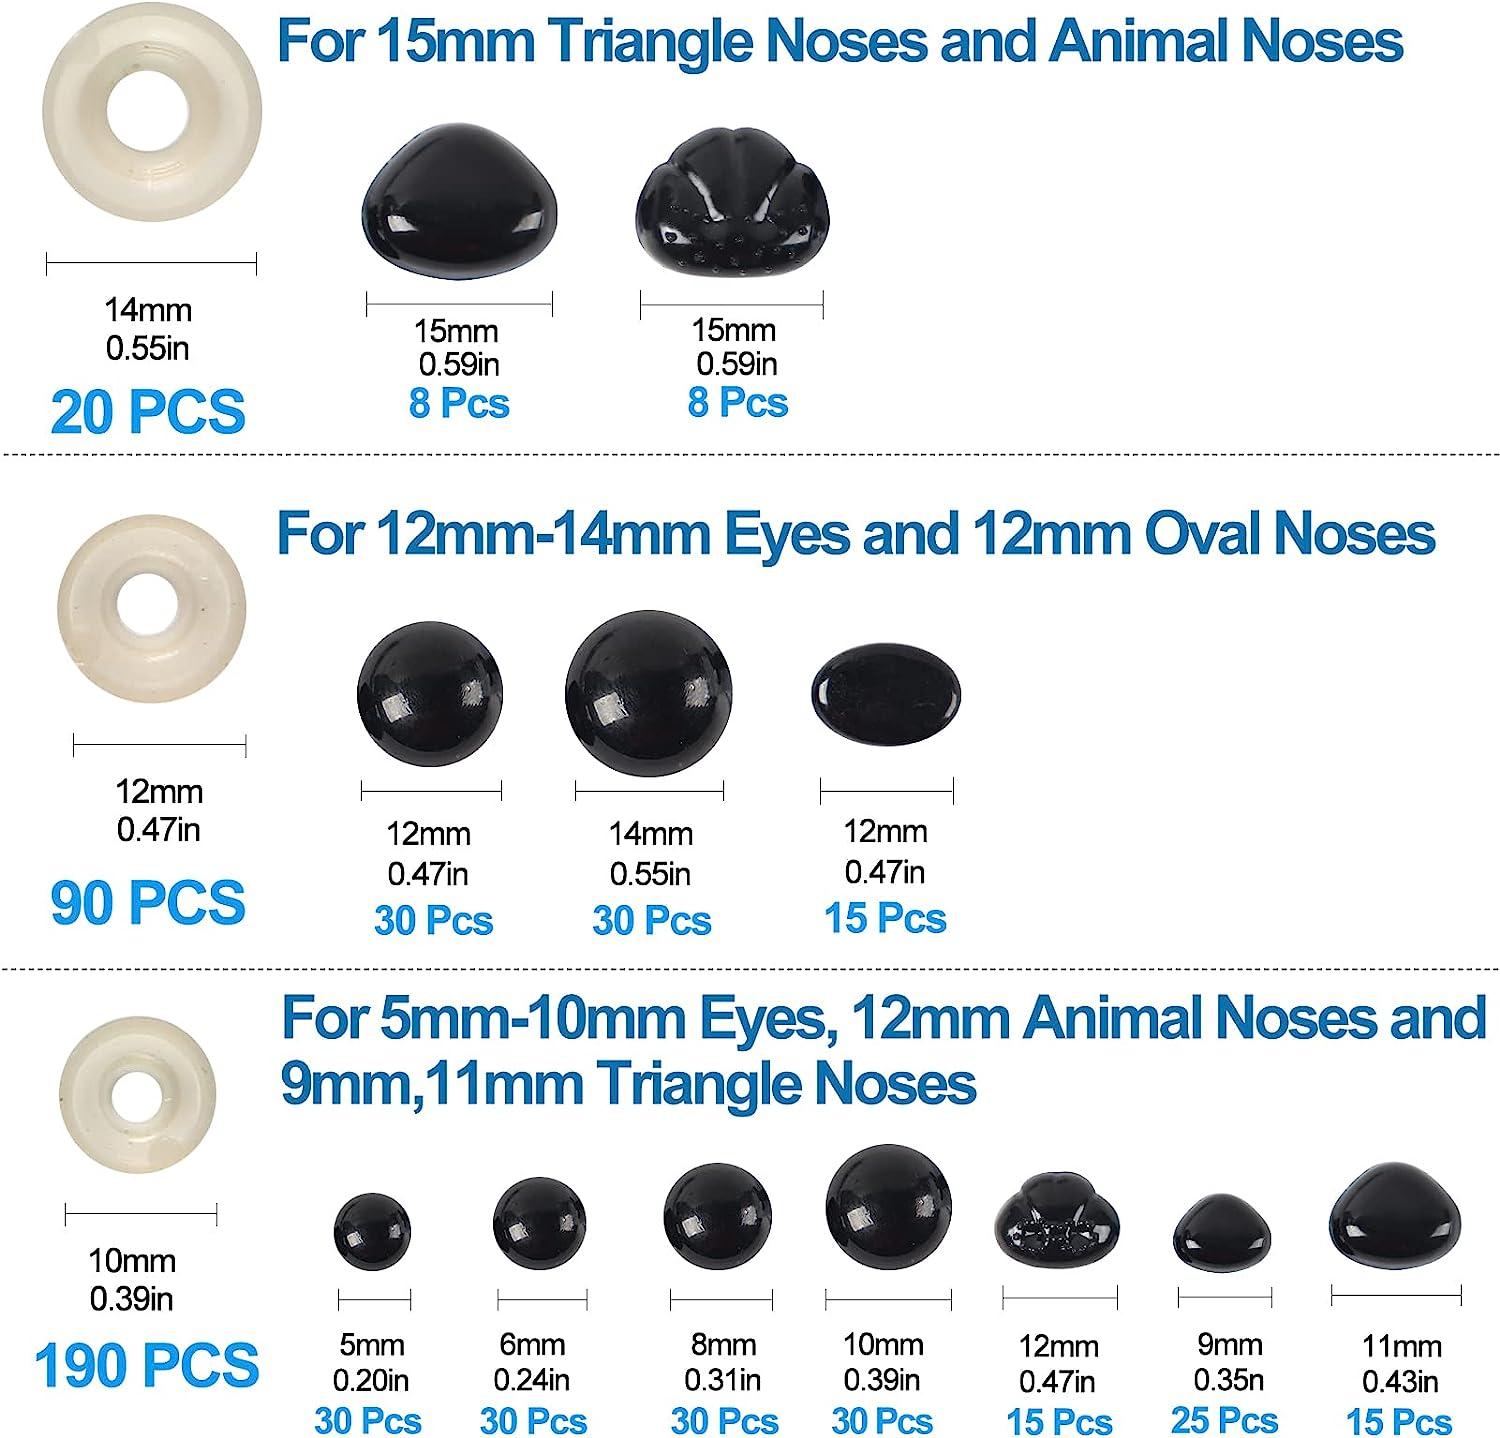 Yexixsr 566PCS Safety Eyes and Noses for Amigurumi Stuffed Crochet